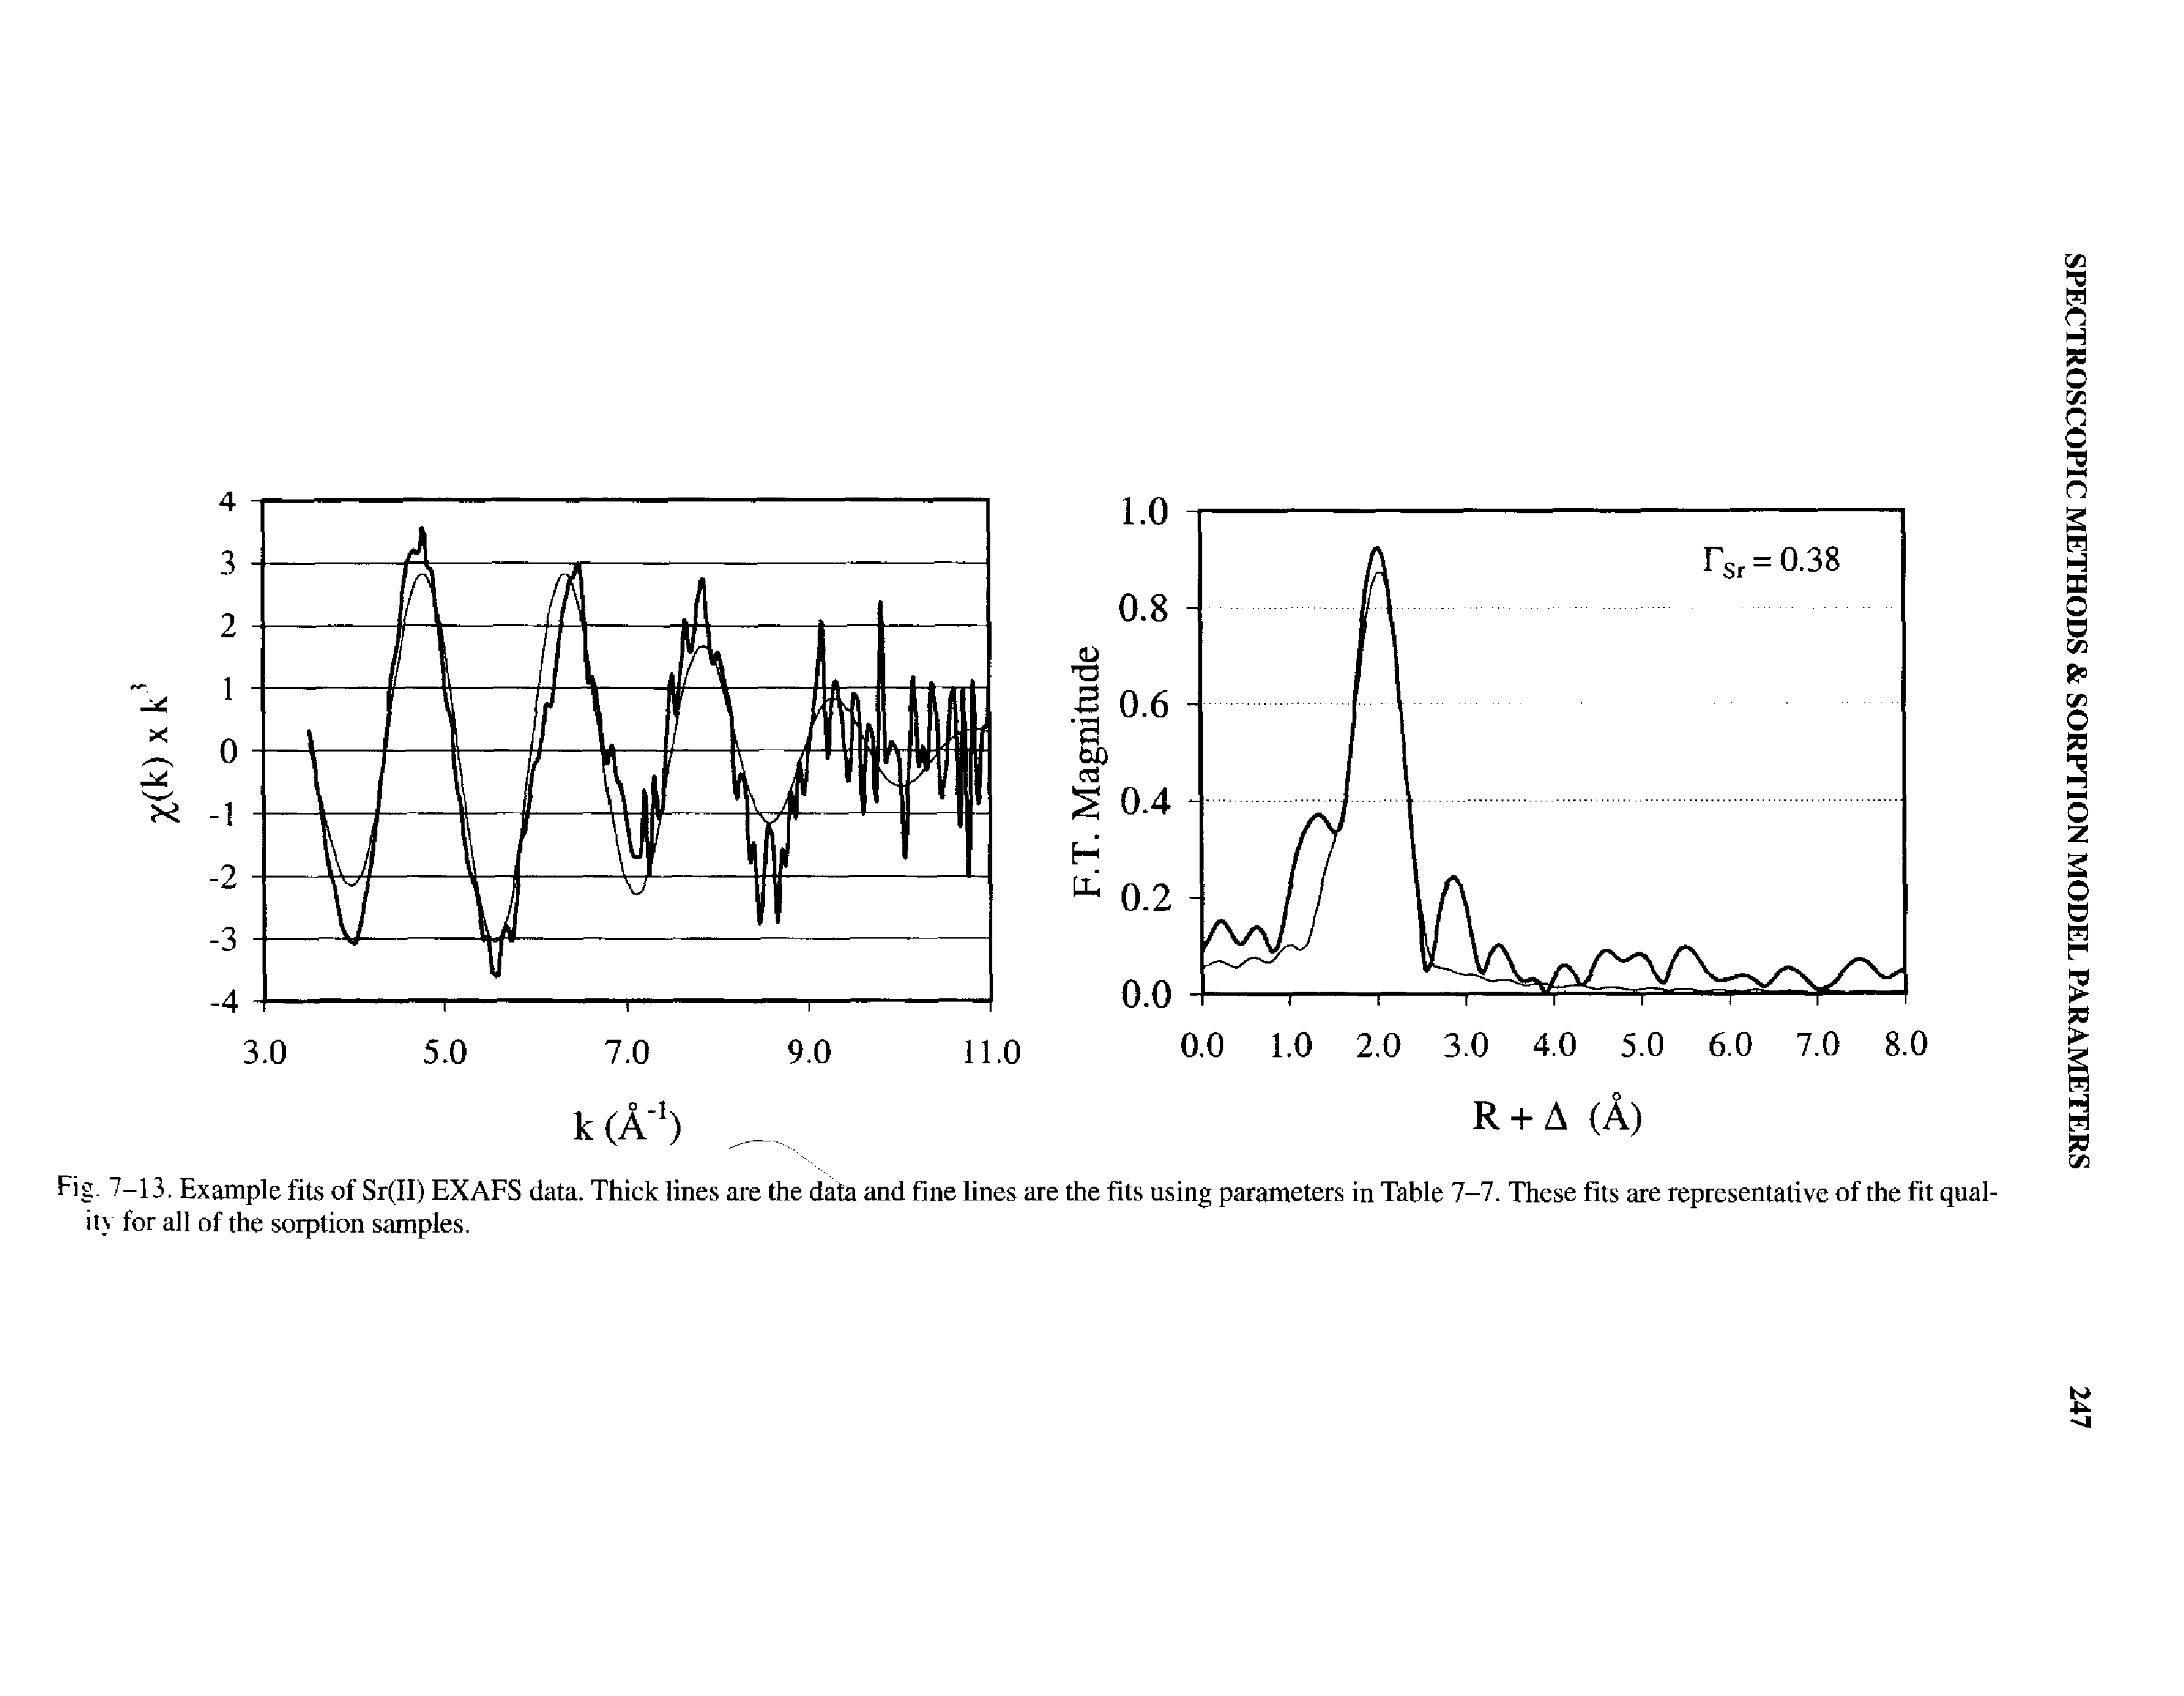 Fig. 7-13. Example fits of Sr(II) EXAFS data. Thick lines are the data and fine lines itv for all of the sorption samples.